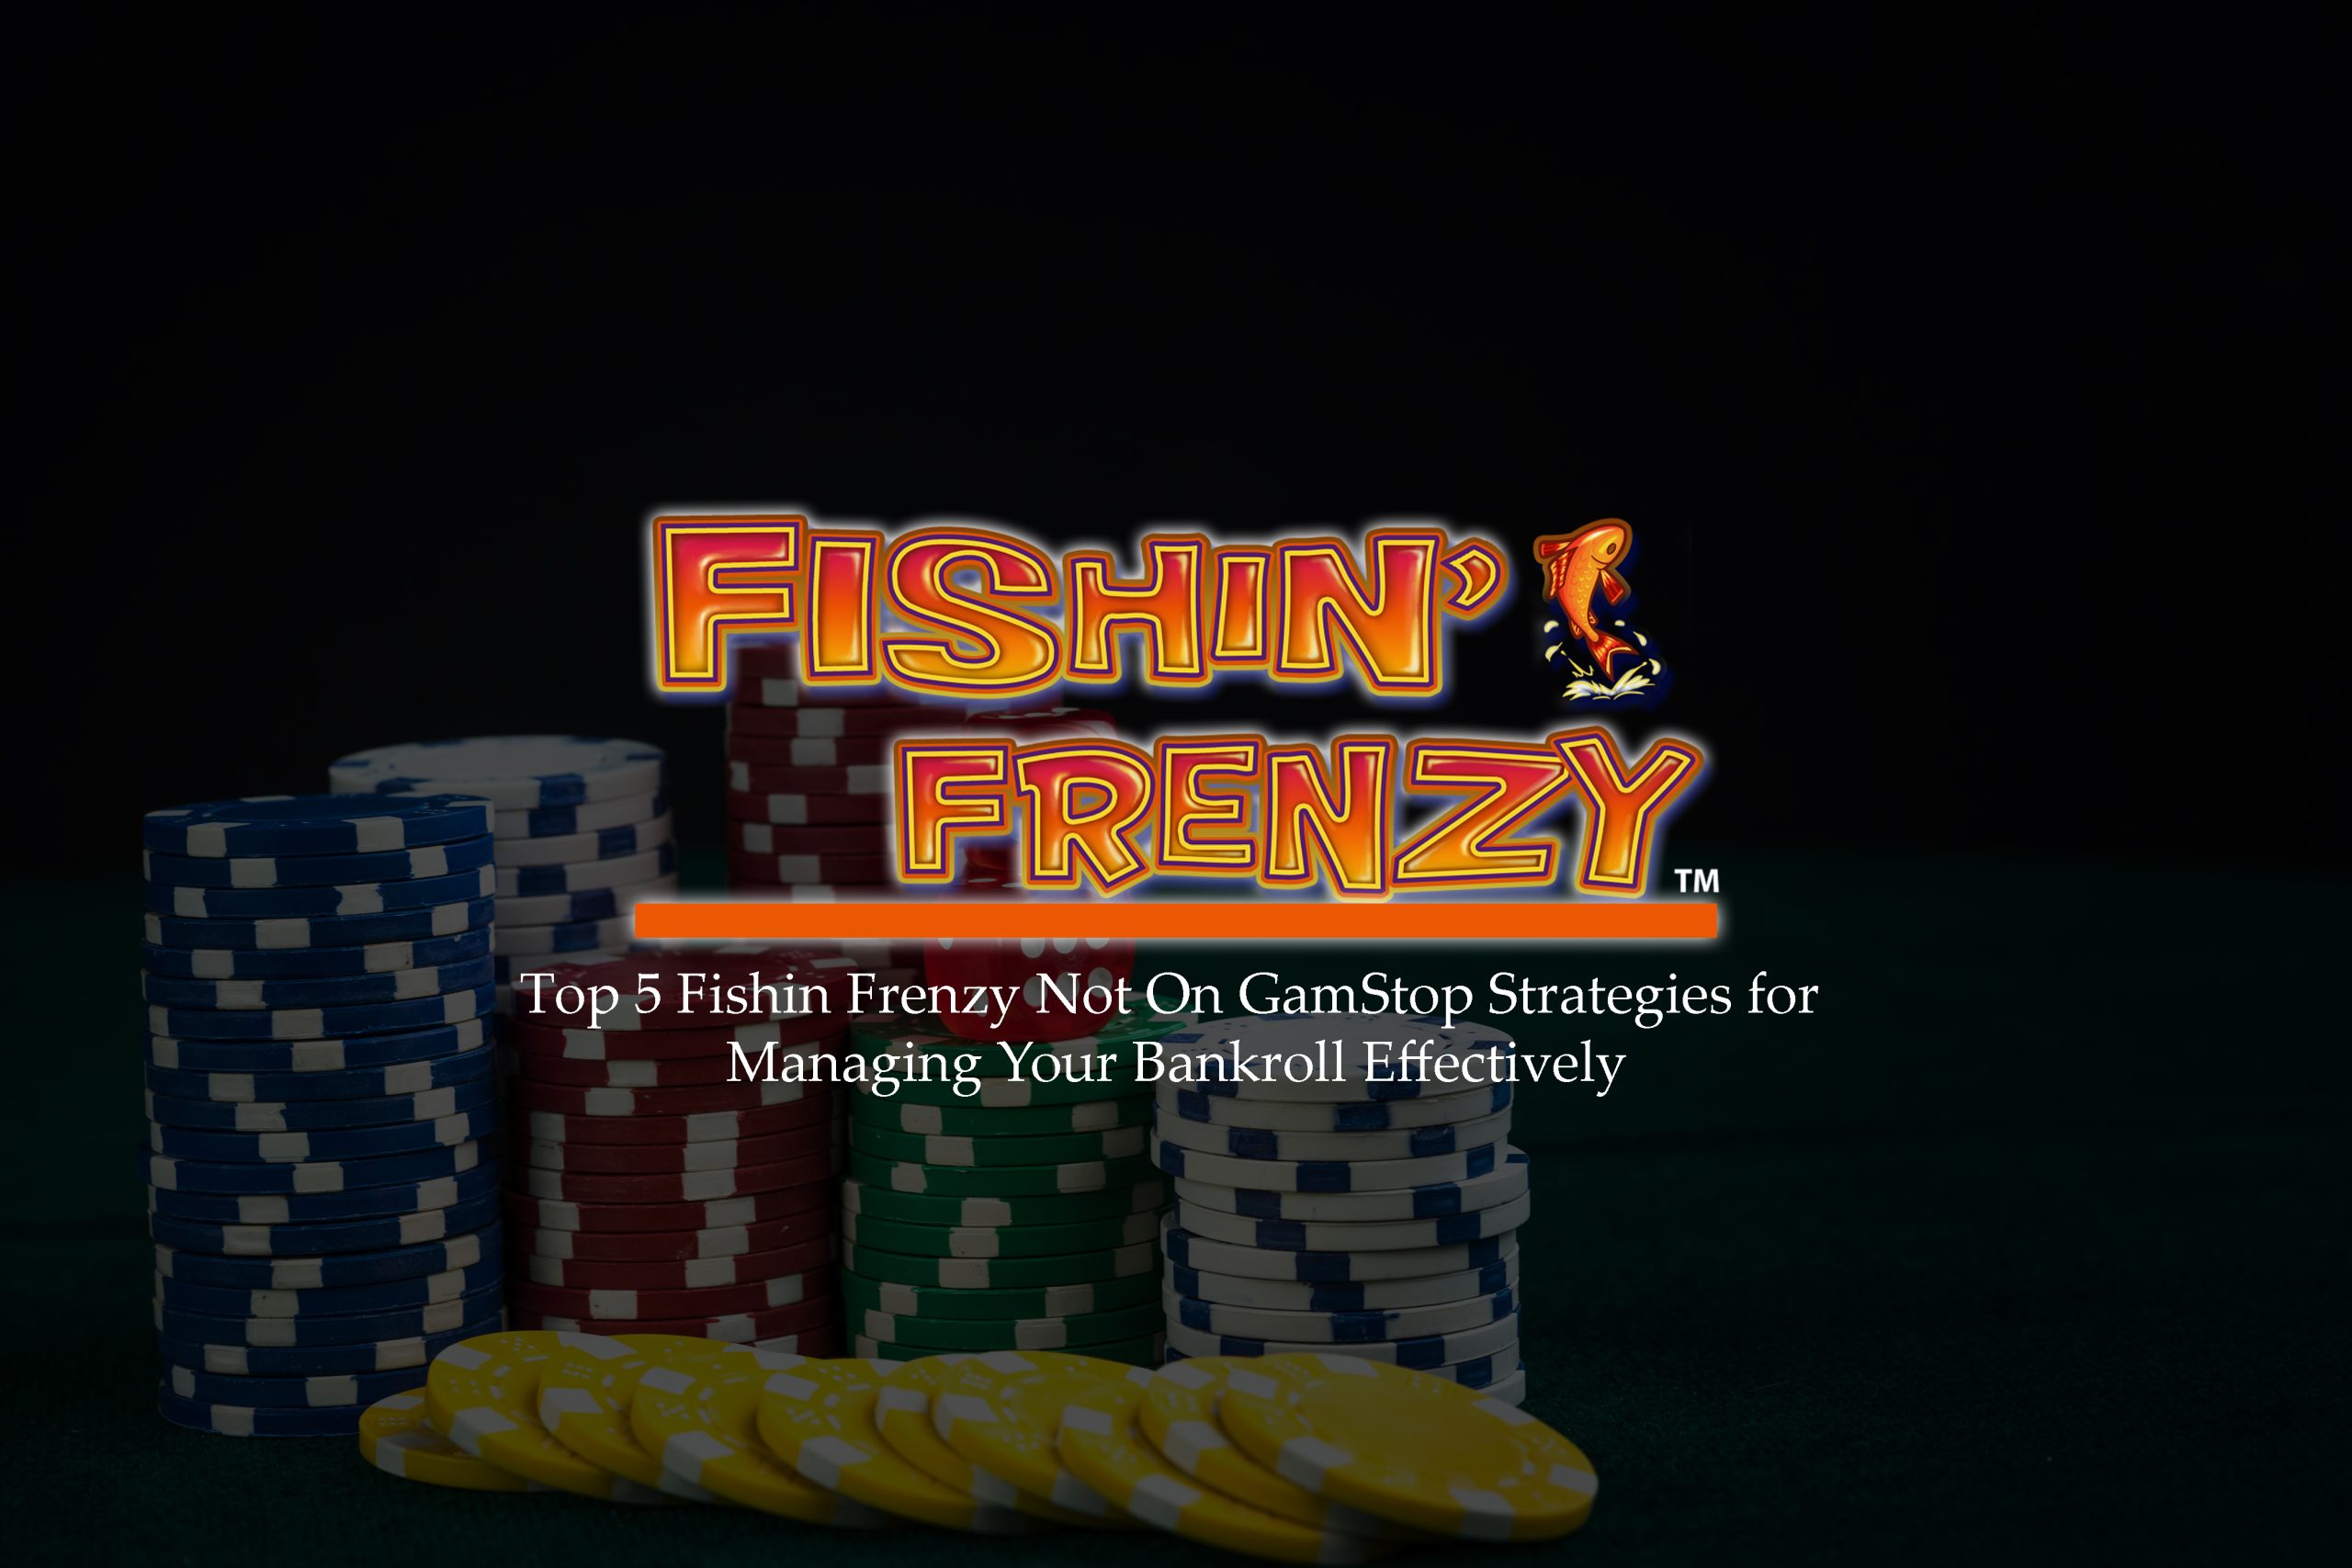 Top 5 Fishin Frenzy Not On GamStop Strategies for Managing Your Bankroll Effectively